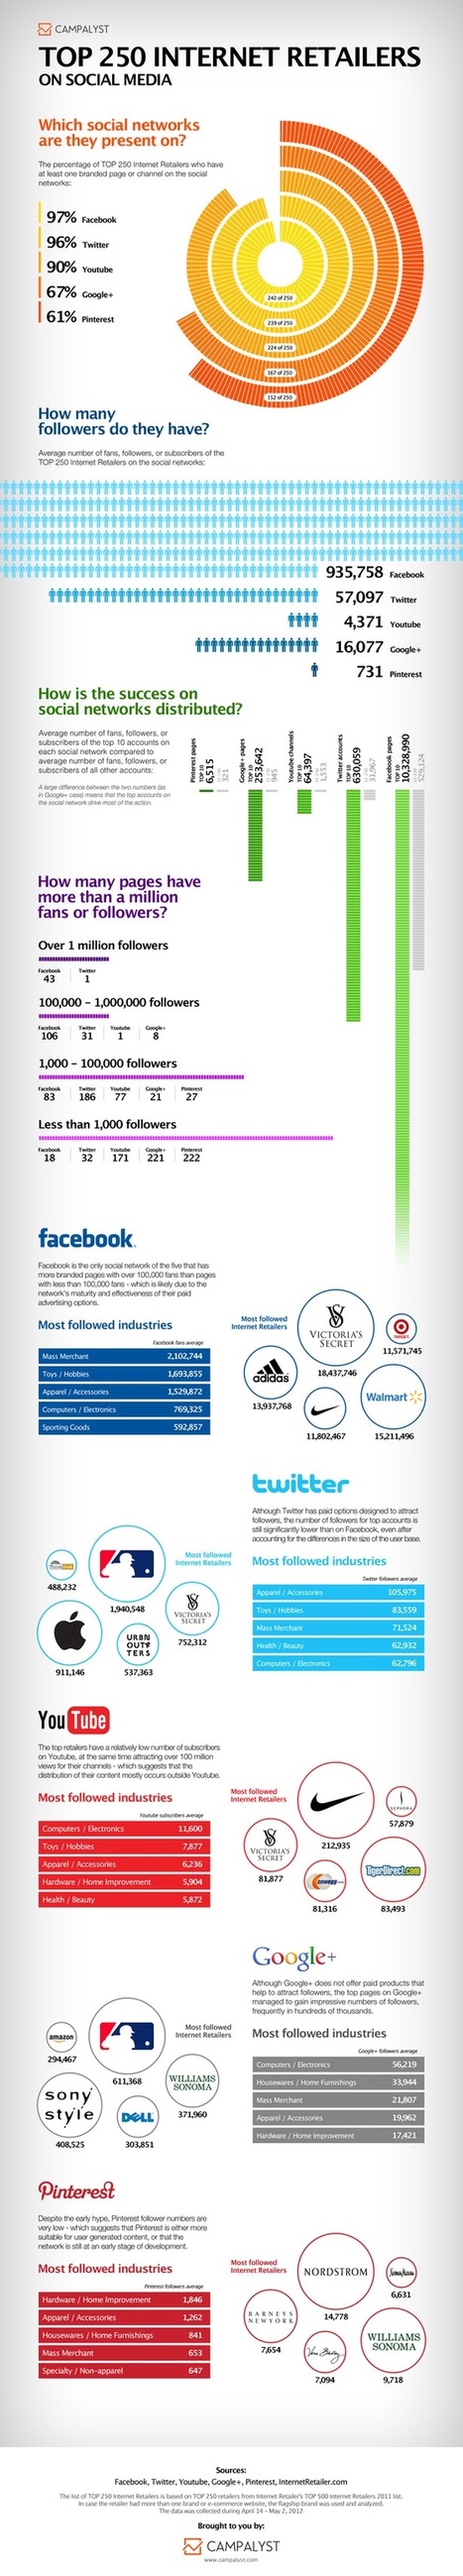 Top Social Internet Retailers [Infographic] | Supply chain News and trends | Scoop.it